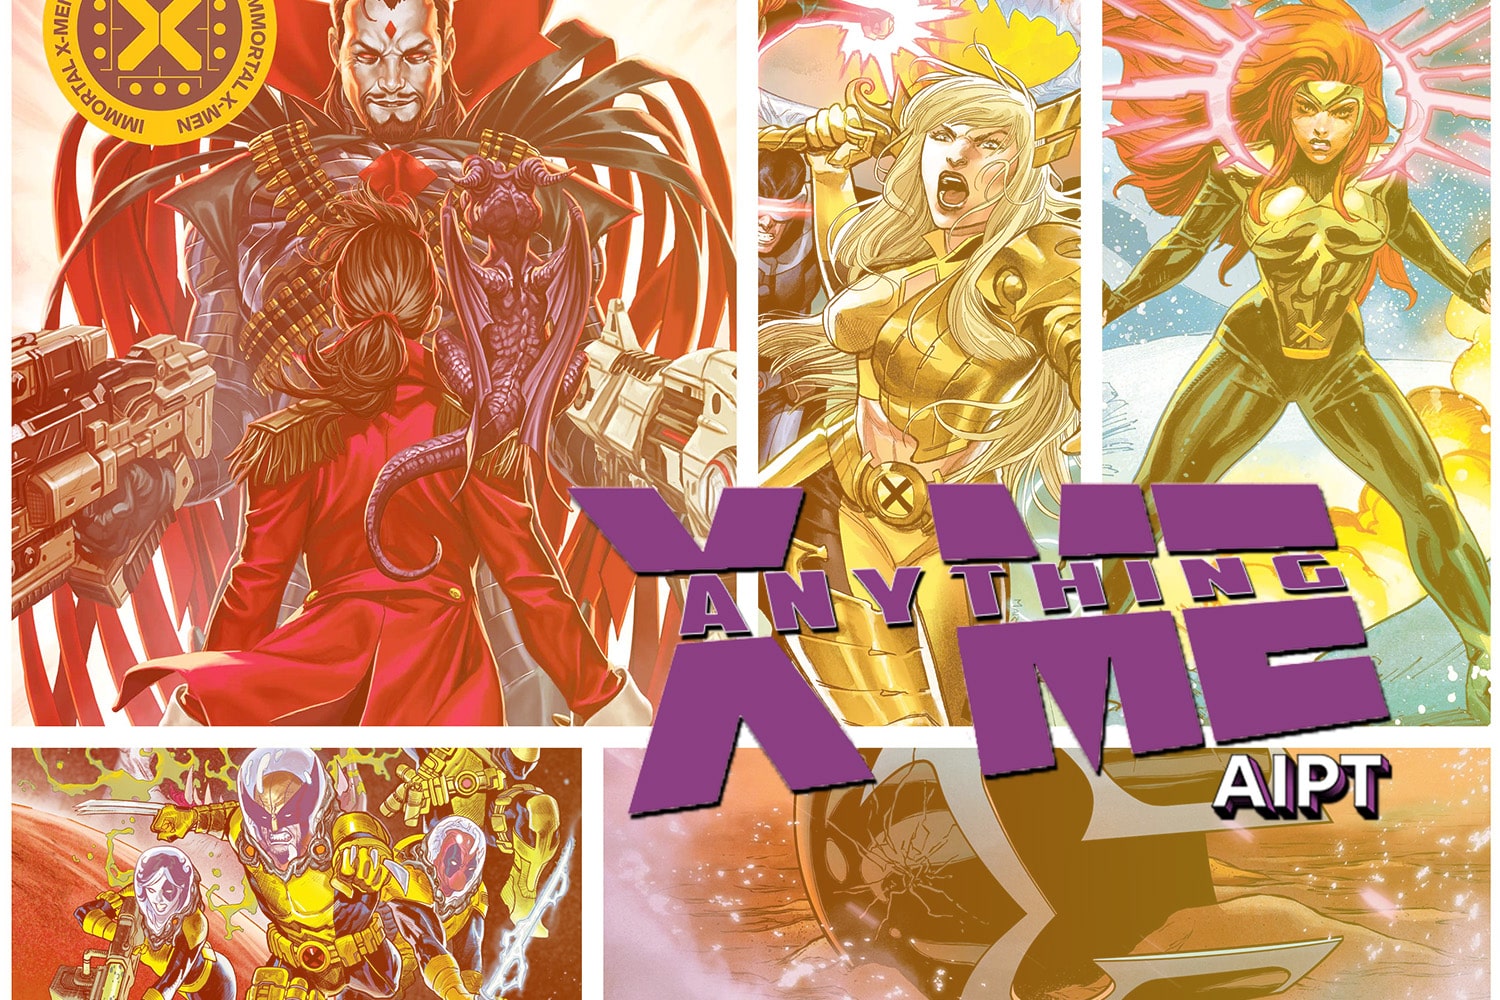 X-Men Monday #175 Call for Questions: X Me Anything With the X-Office